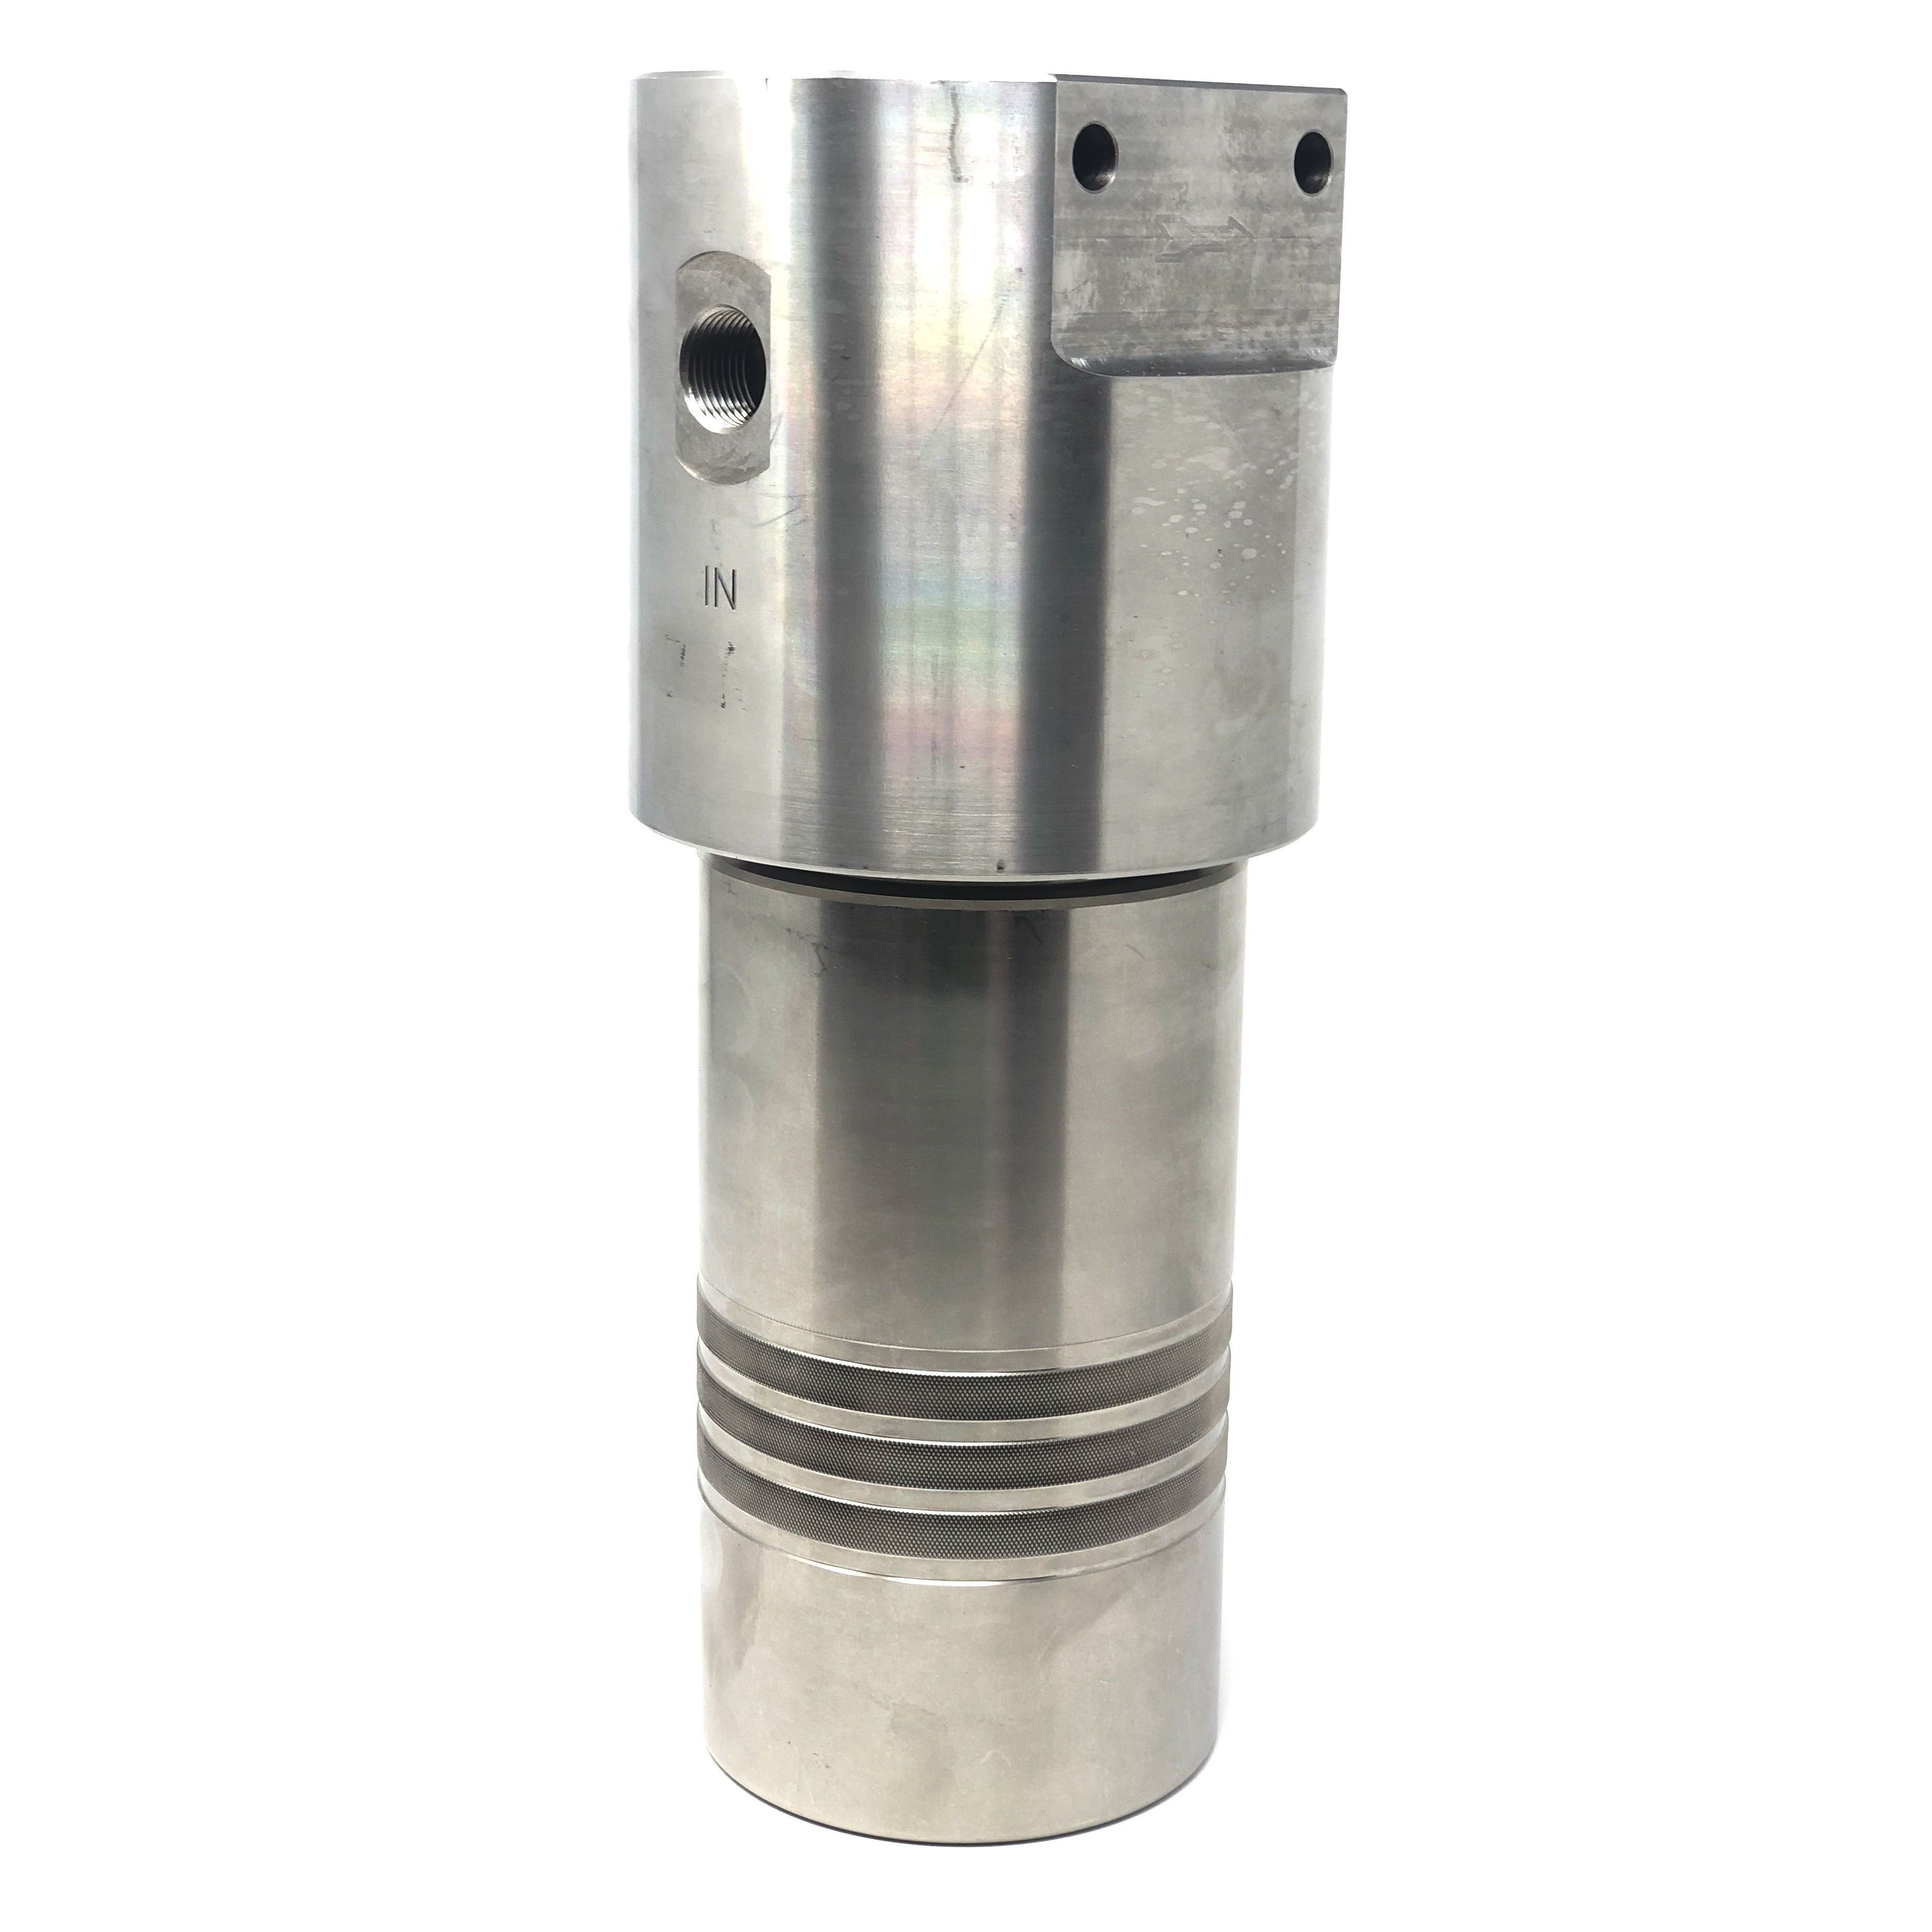 52S-248S-40SEN : Chase Ultra High Pressure Inline Filter, 10000psi, #8 SAE (1/2"), 40 Micron, With Visual Indicator, No Bypass